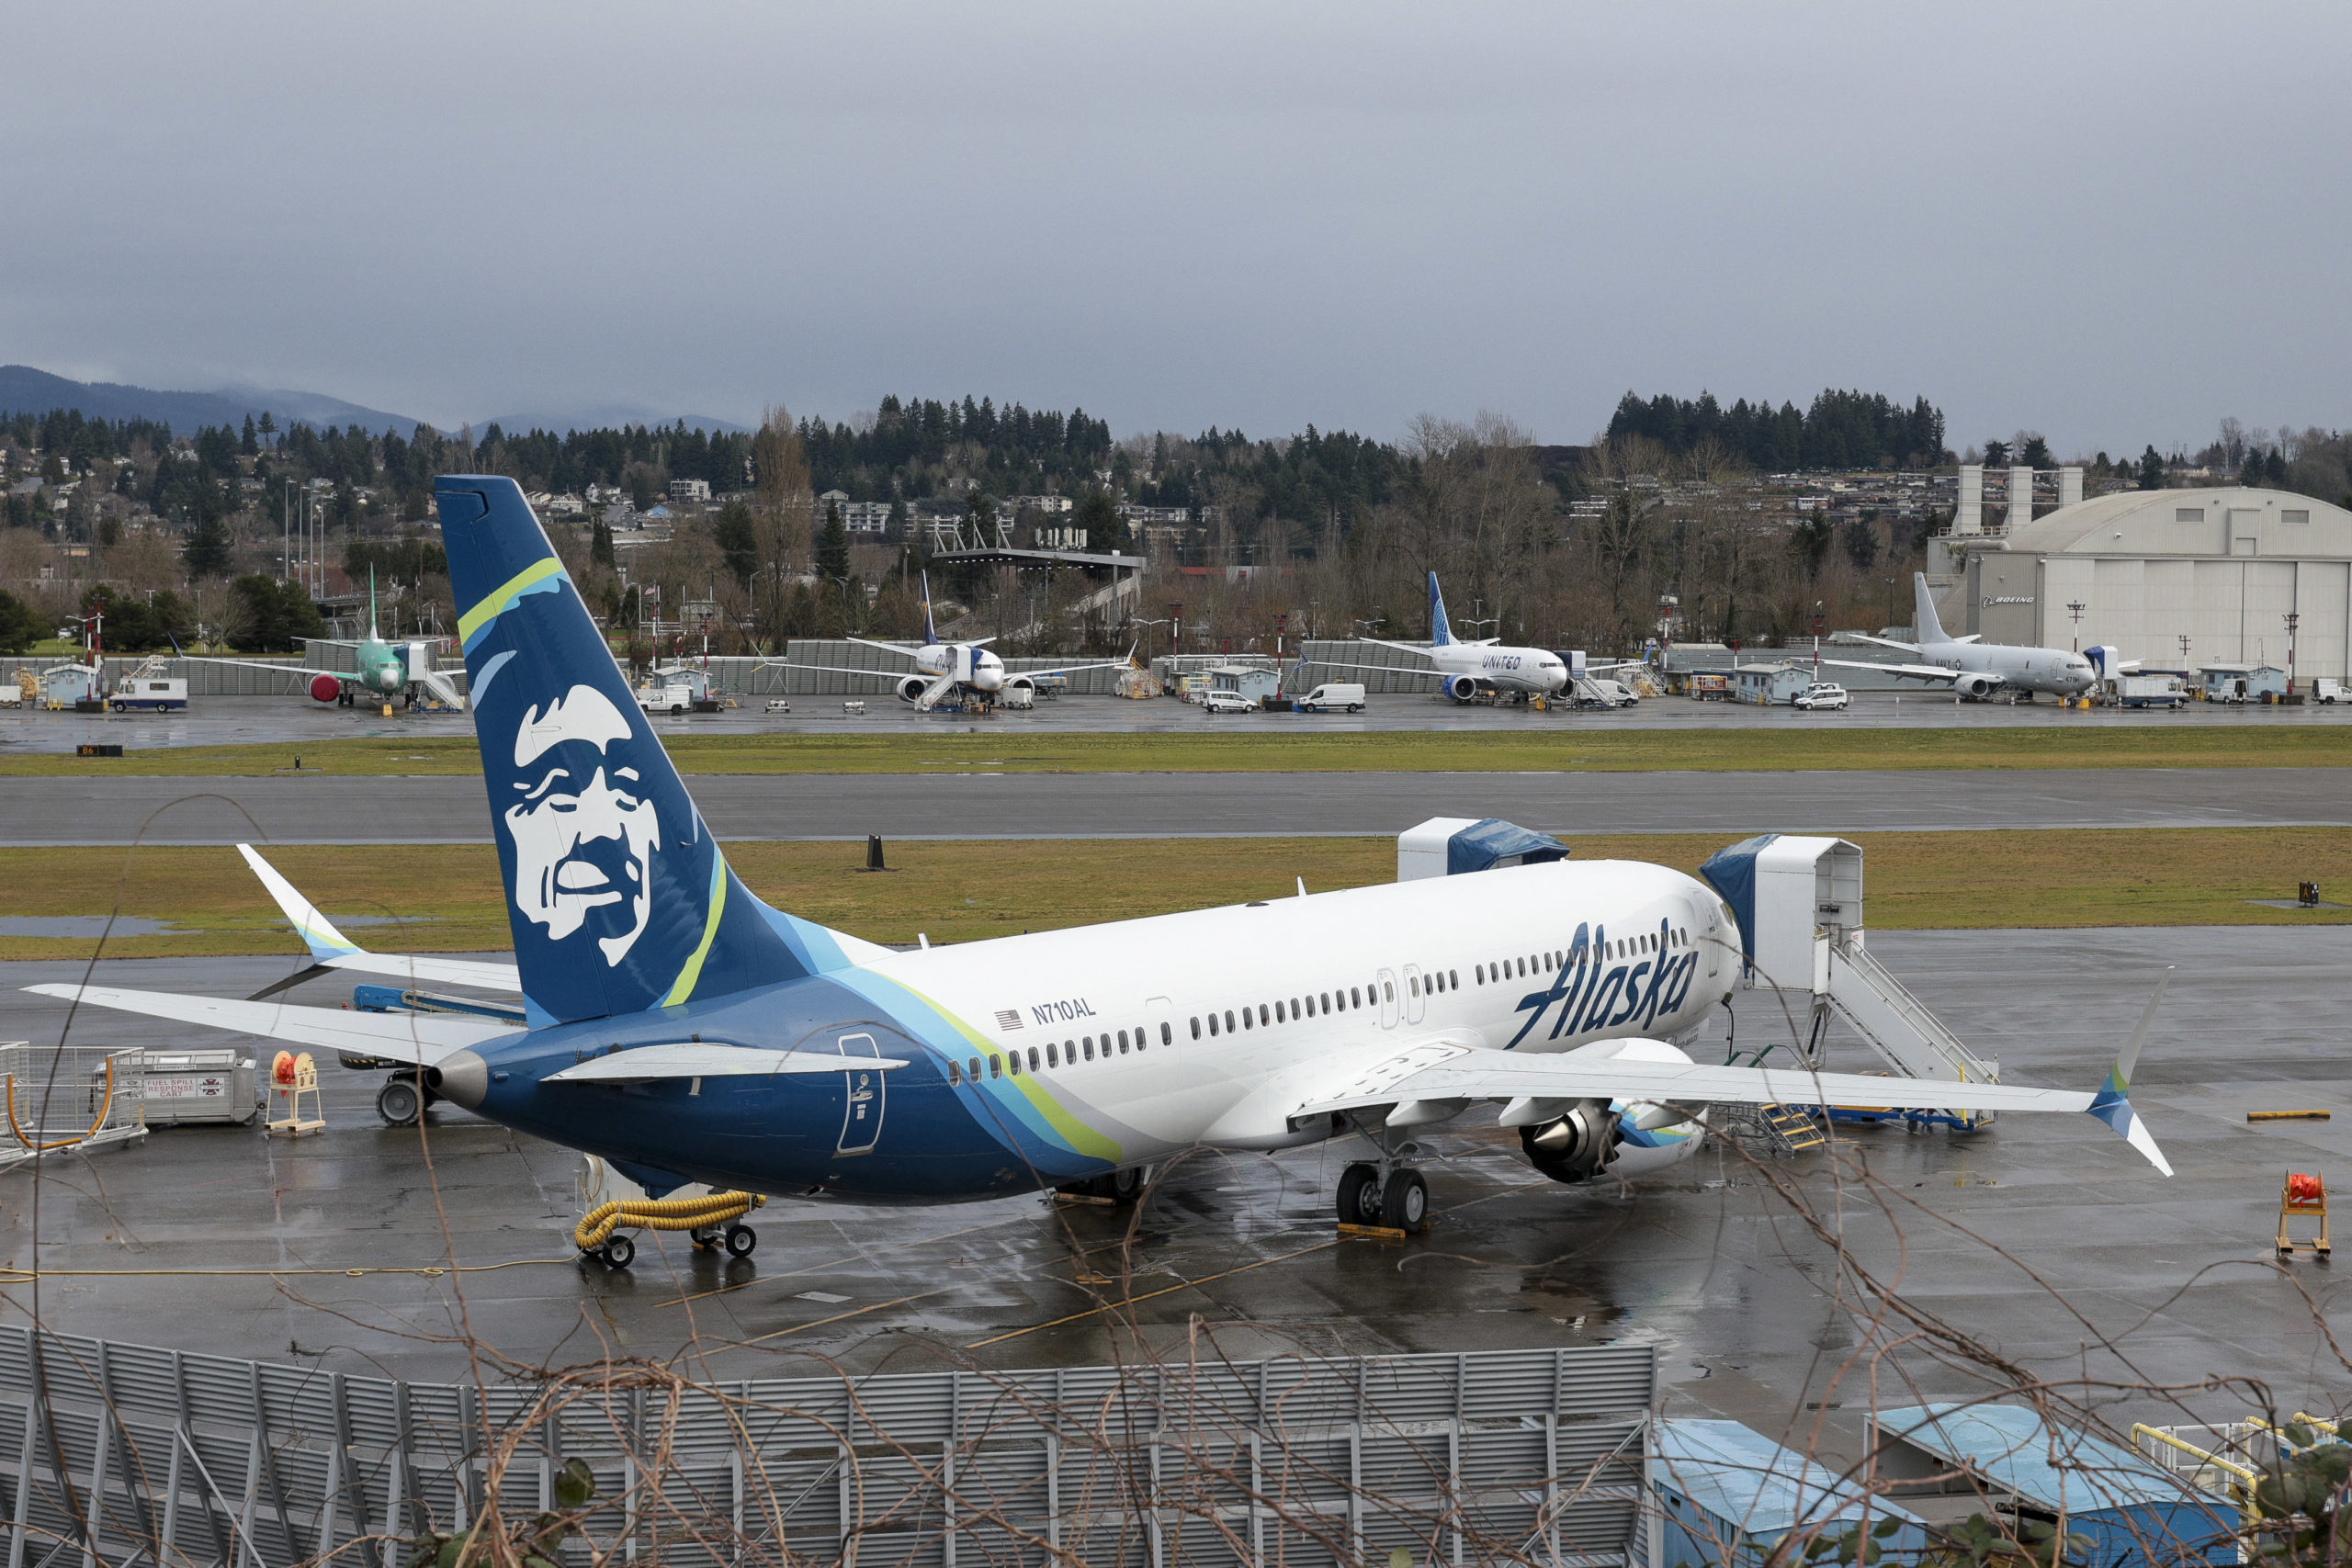 A Boeing 737 MAX 9 for Alaska Airlines is pictured along with other 737 aircraft at Renton Municipal Airport adjacent to Boeing's factory in Renton, Washington. (Photo by JASON REDMOND/AFP via Getty Images)